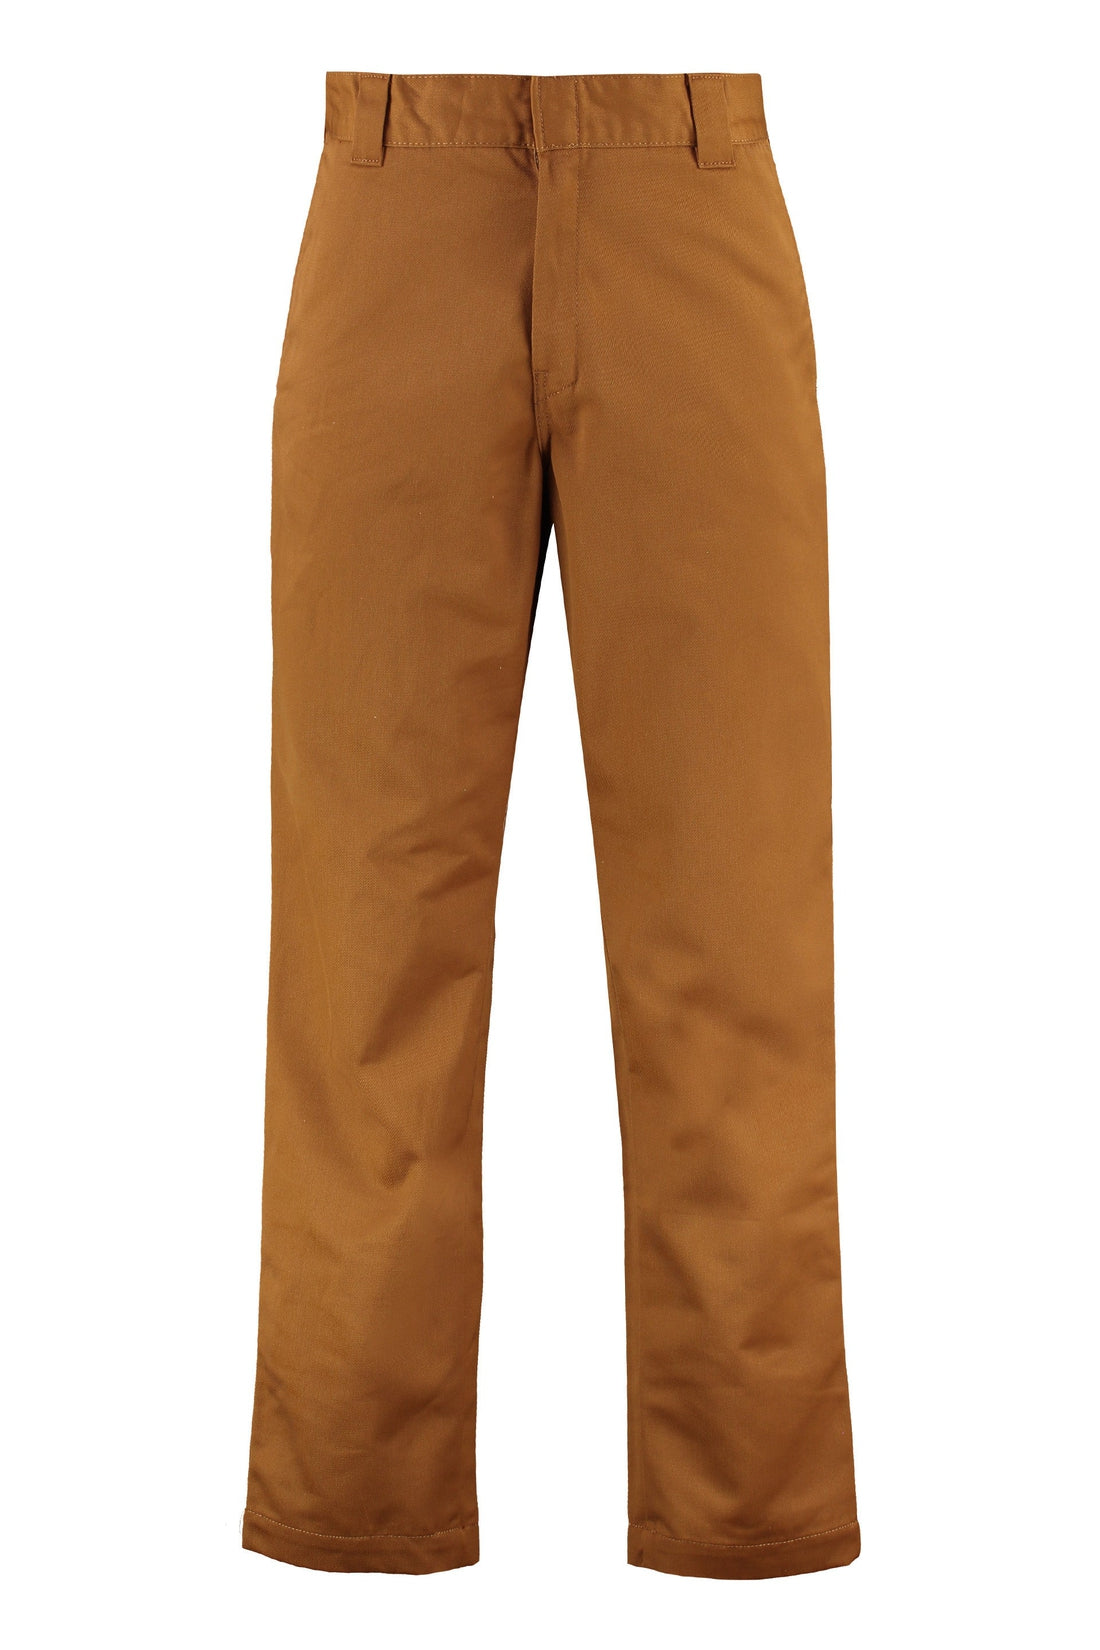 Carhartt-OUTLET-SALE-Cotton Chino trousers-ARCHIVIST